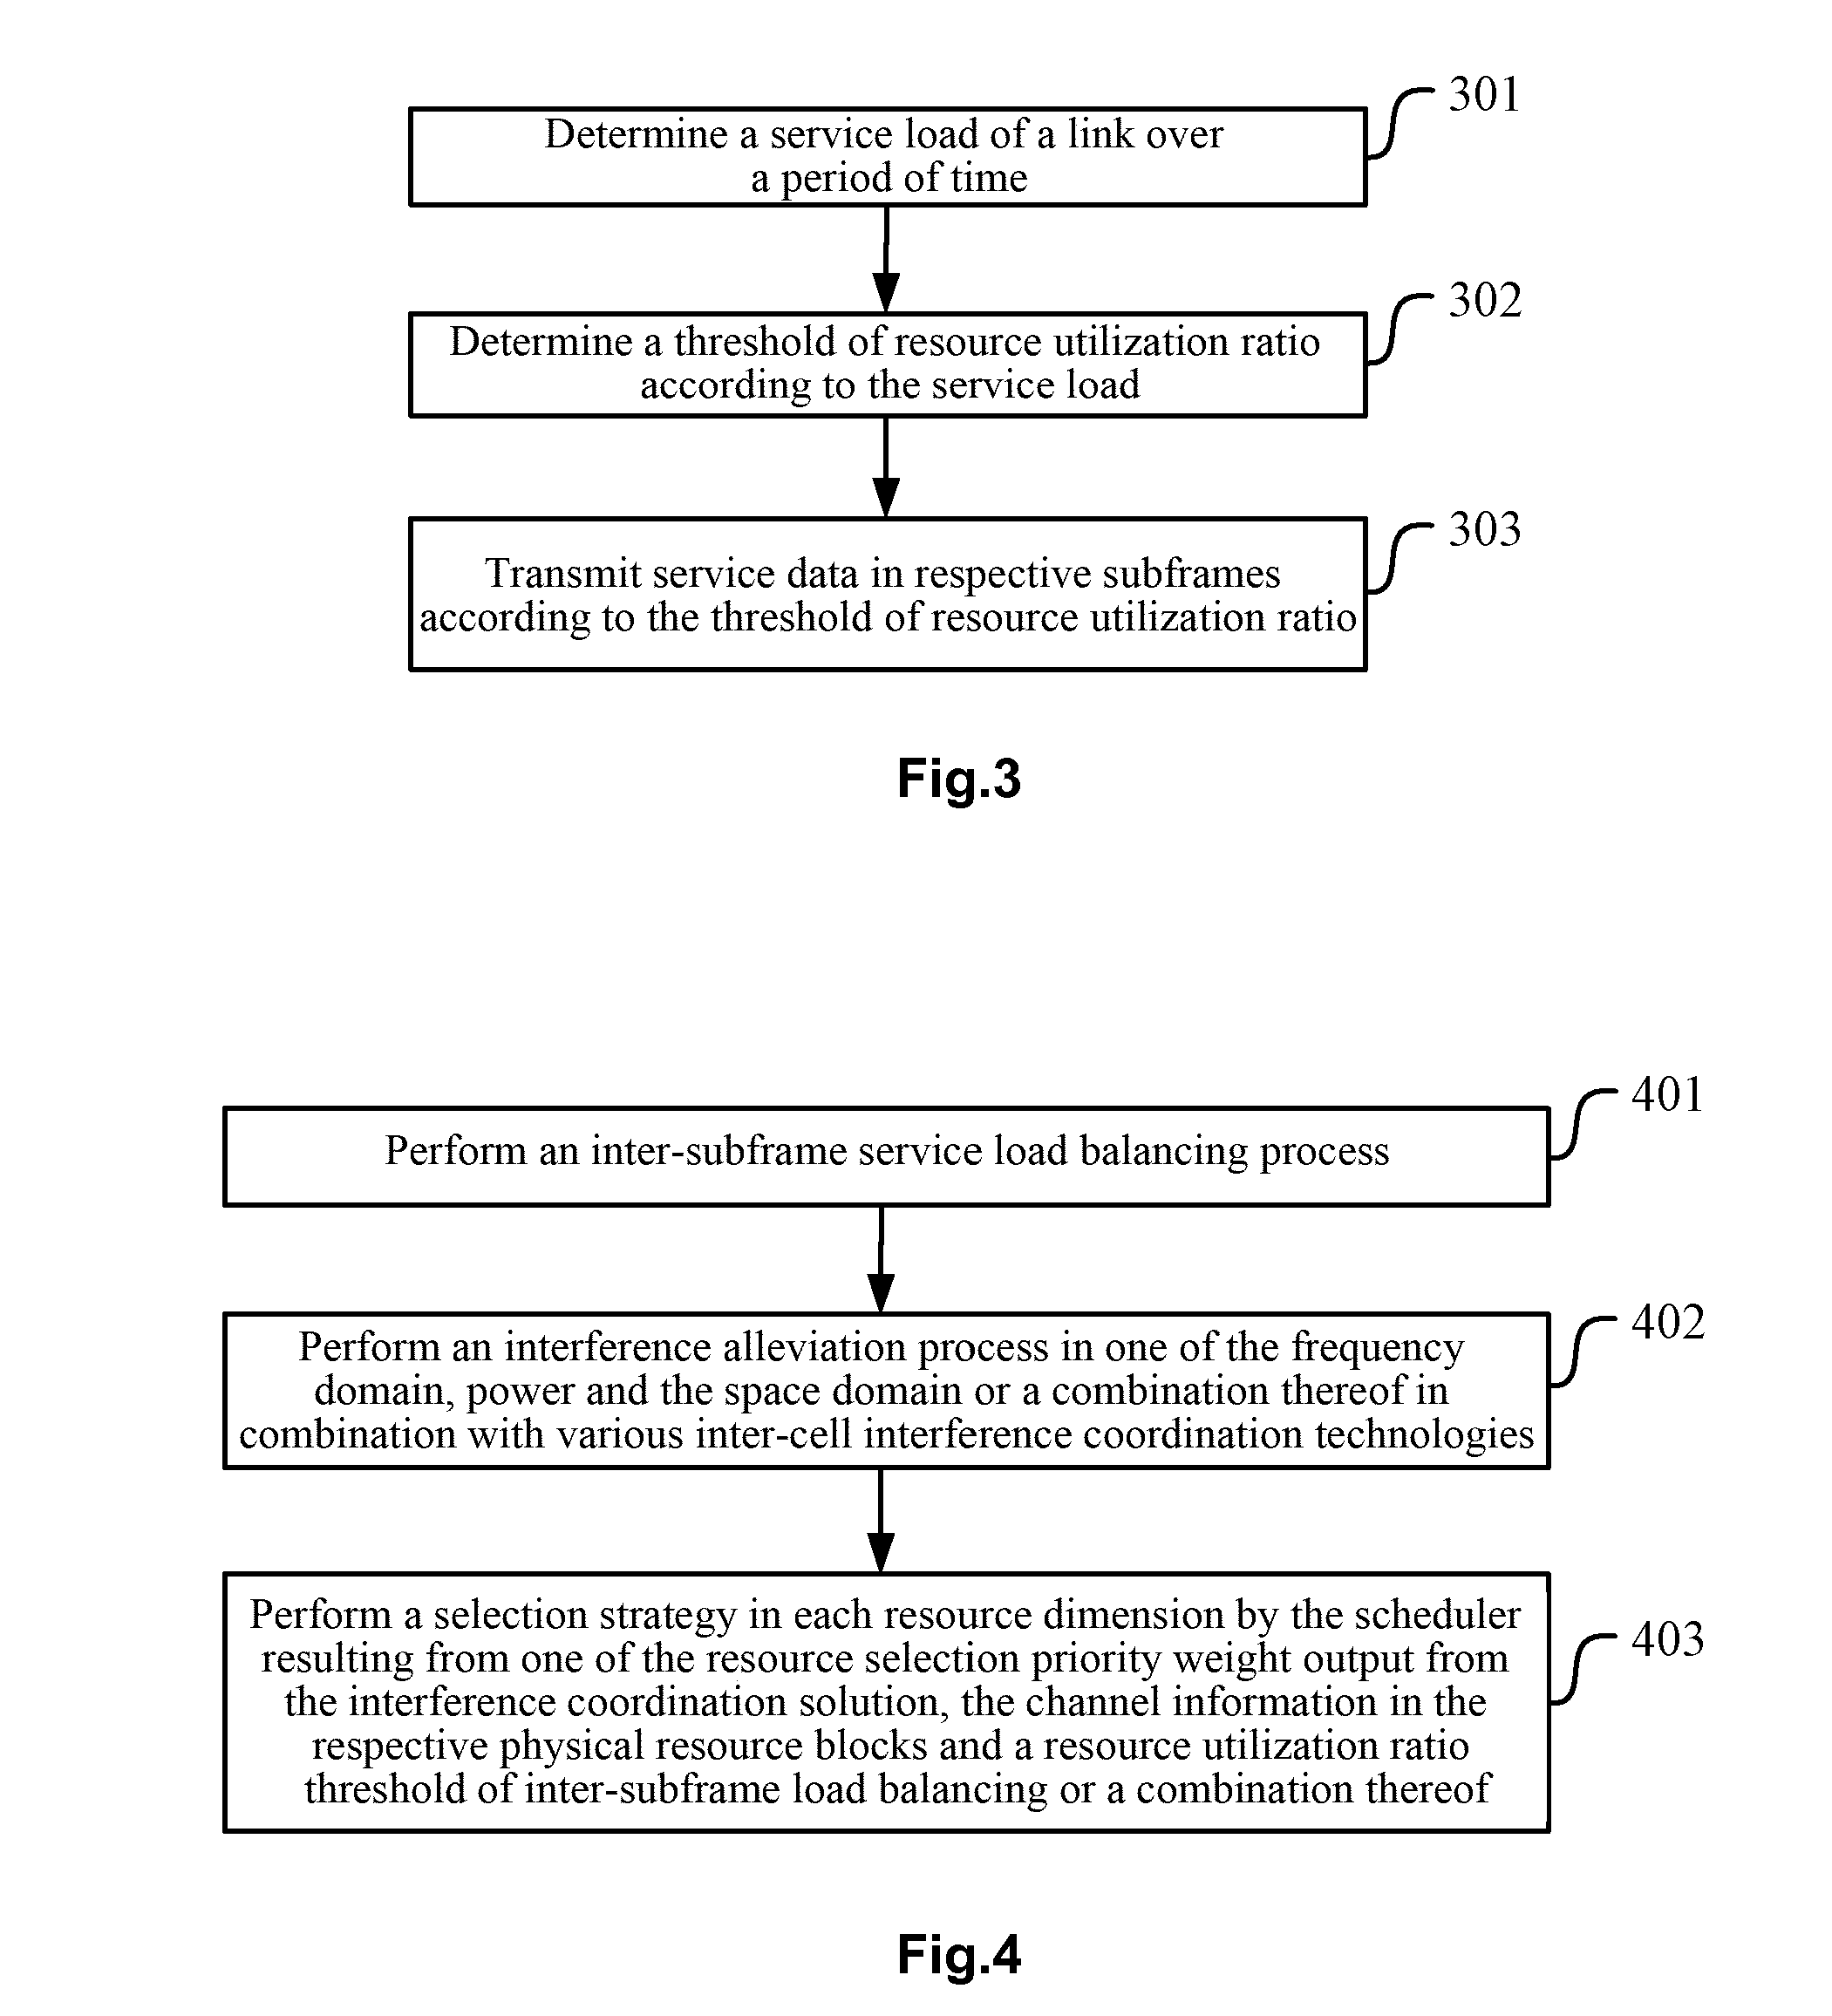 Method and device for processing inter-subframe service load balancing and processing inter-cell interference